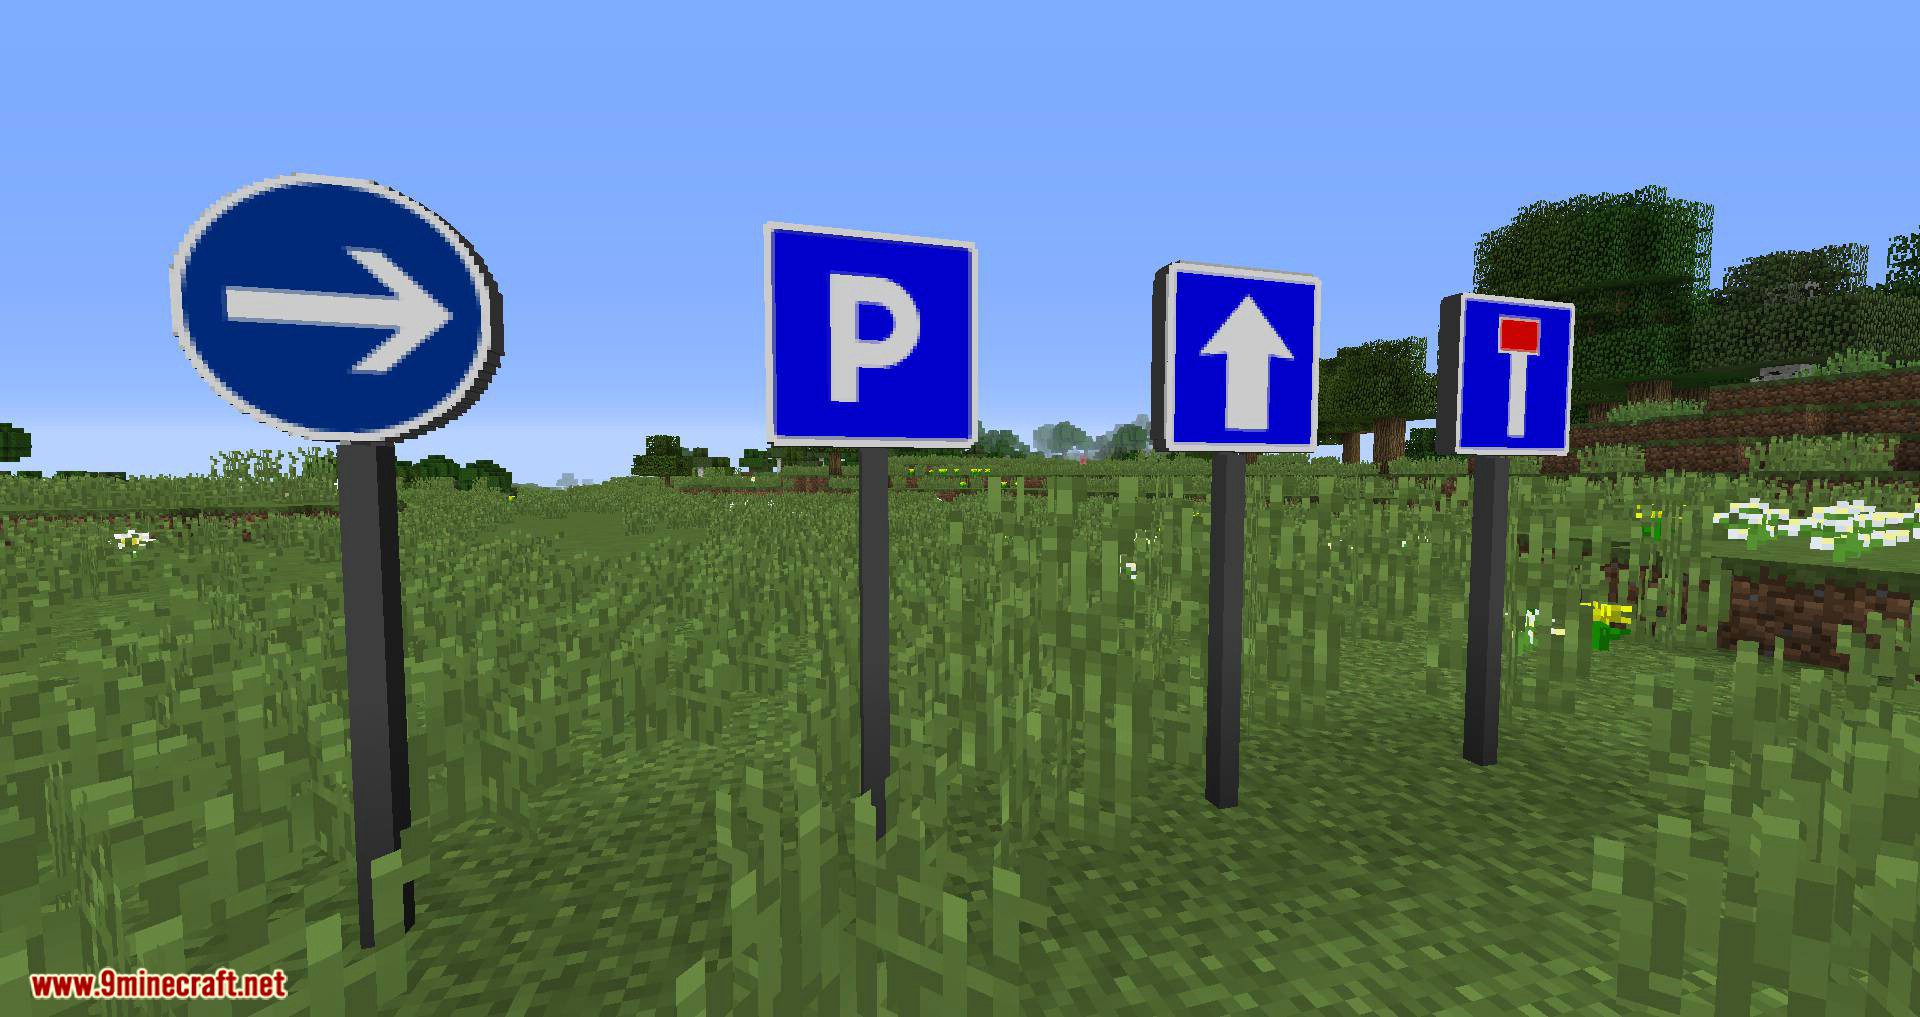 More Road Mod (1.20.4, 1.15.2) - Adds Decoration for the Roads 13